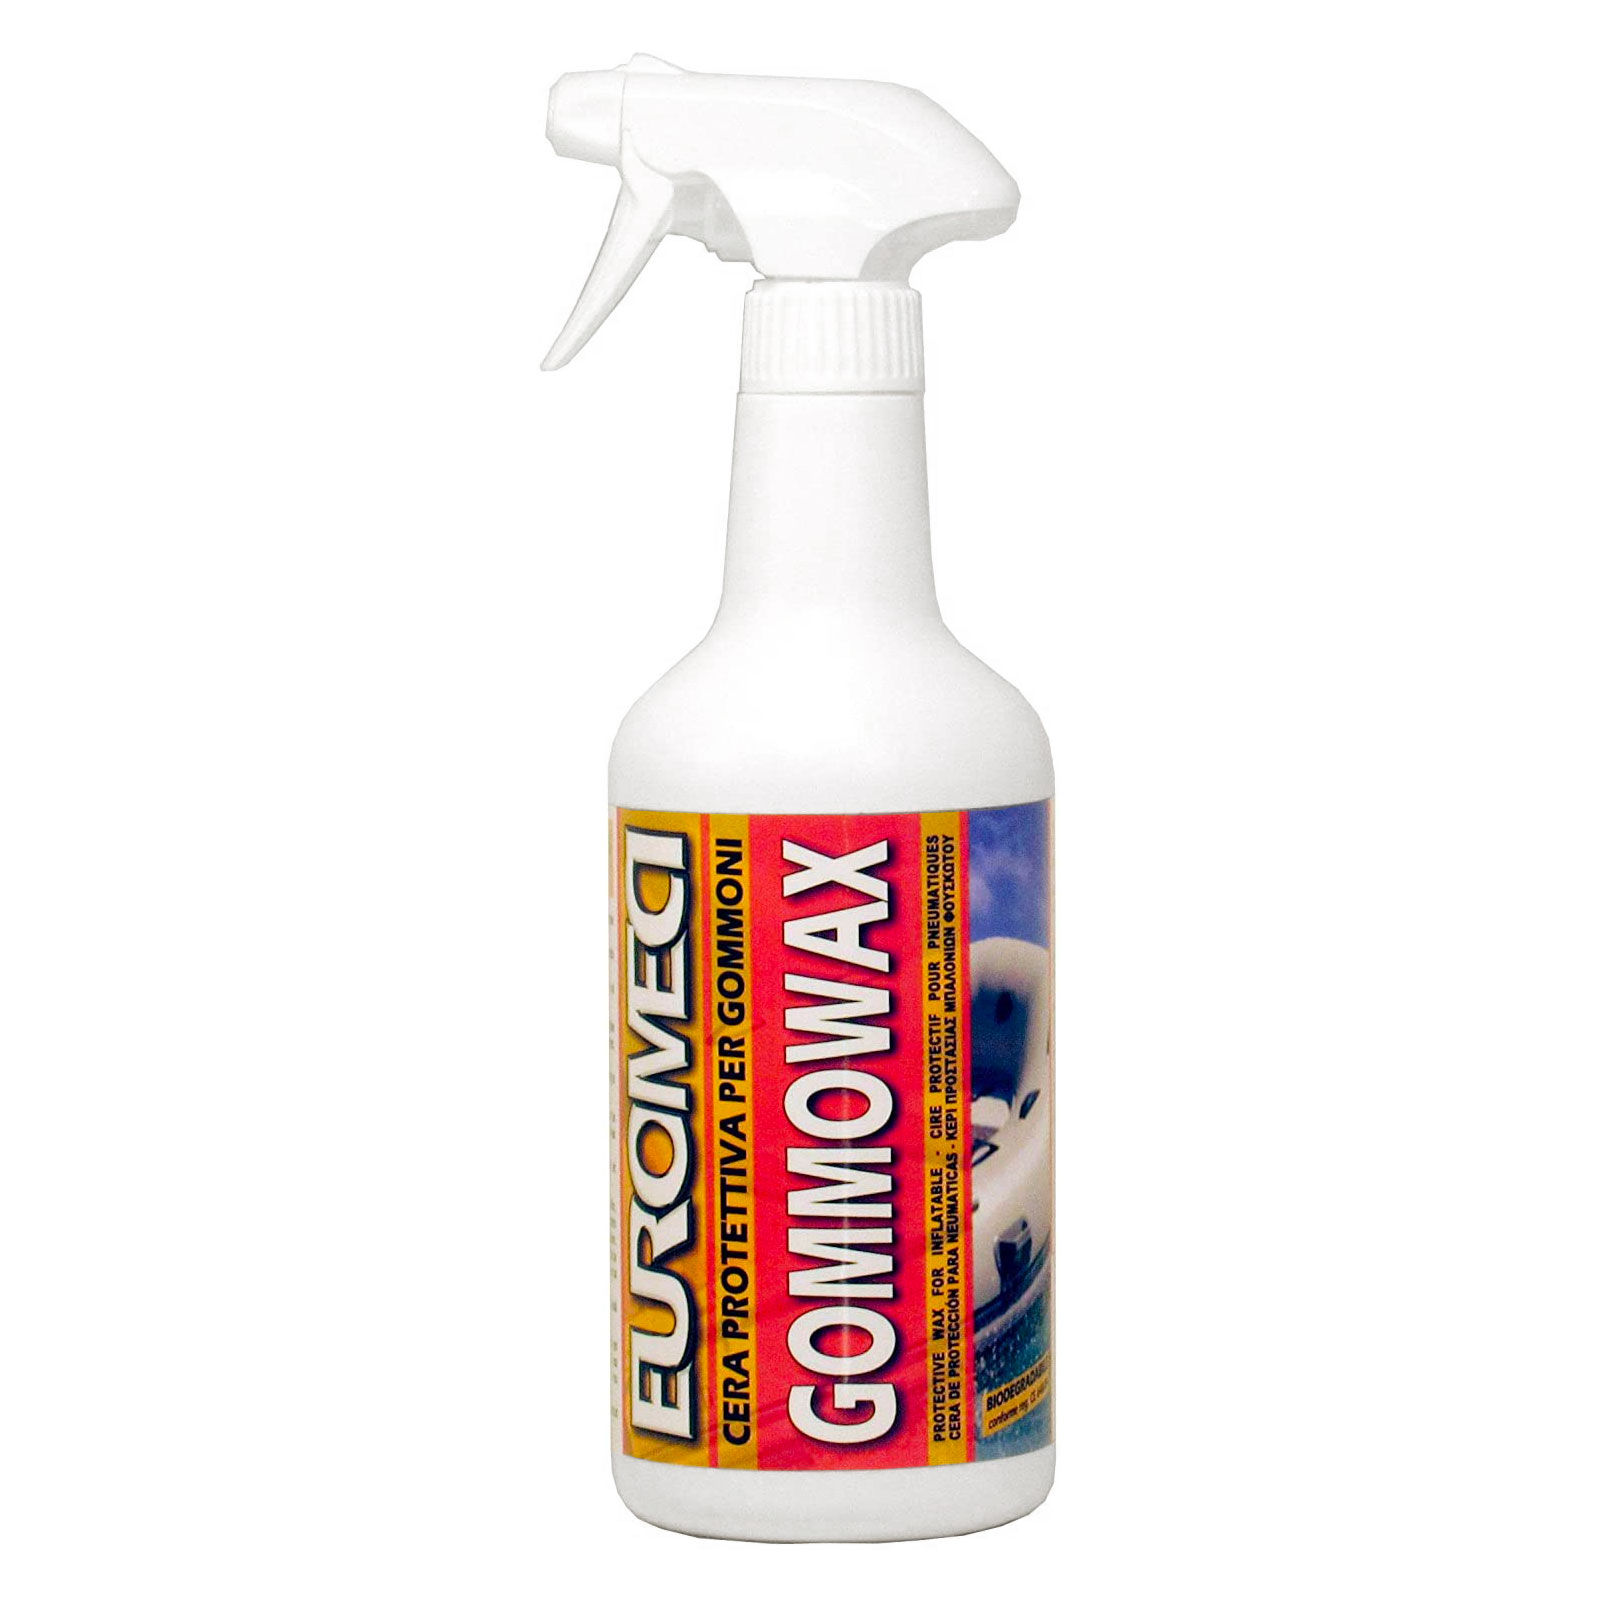 Anti-corrosion spray - Inox - CAMP S.r.l. - for stainless steel